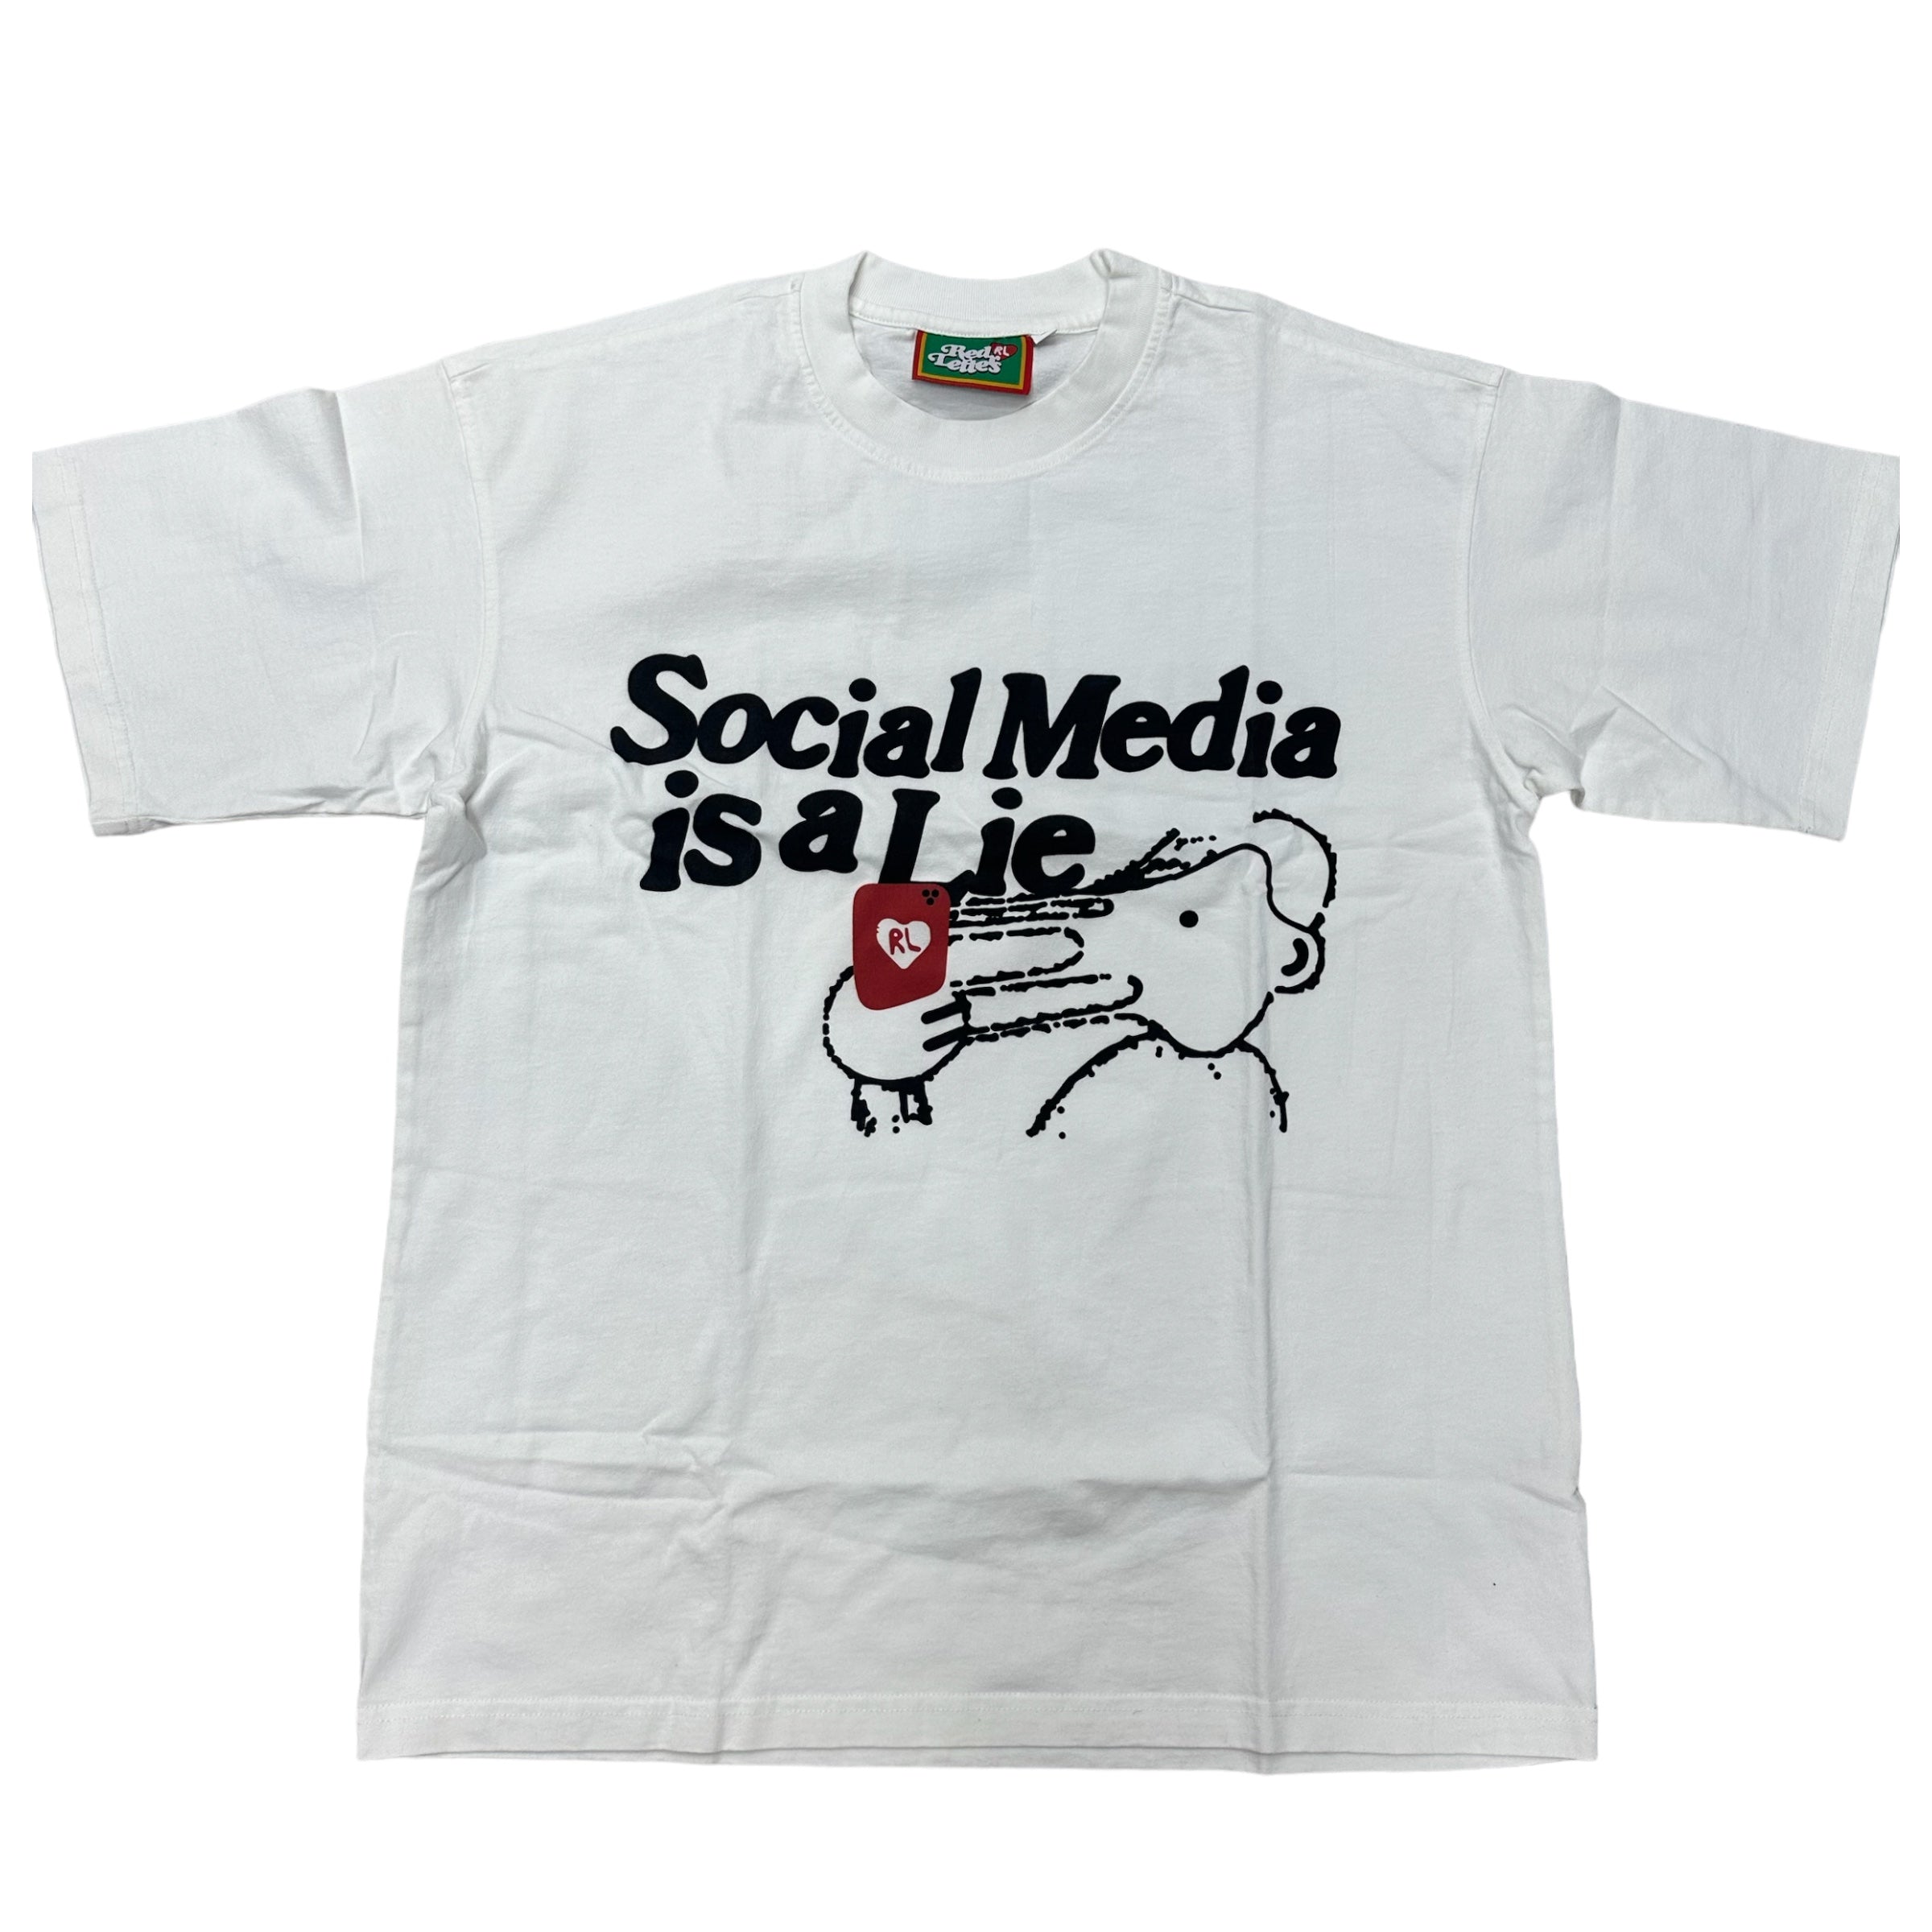 Red Letters vintage OverSize IG Tee white